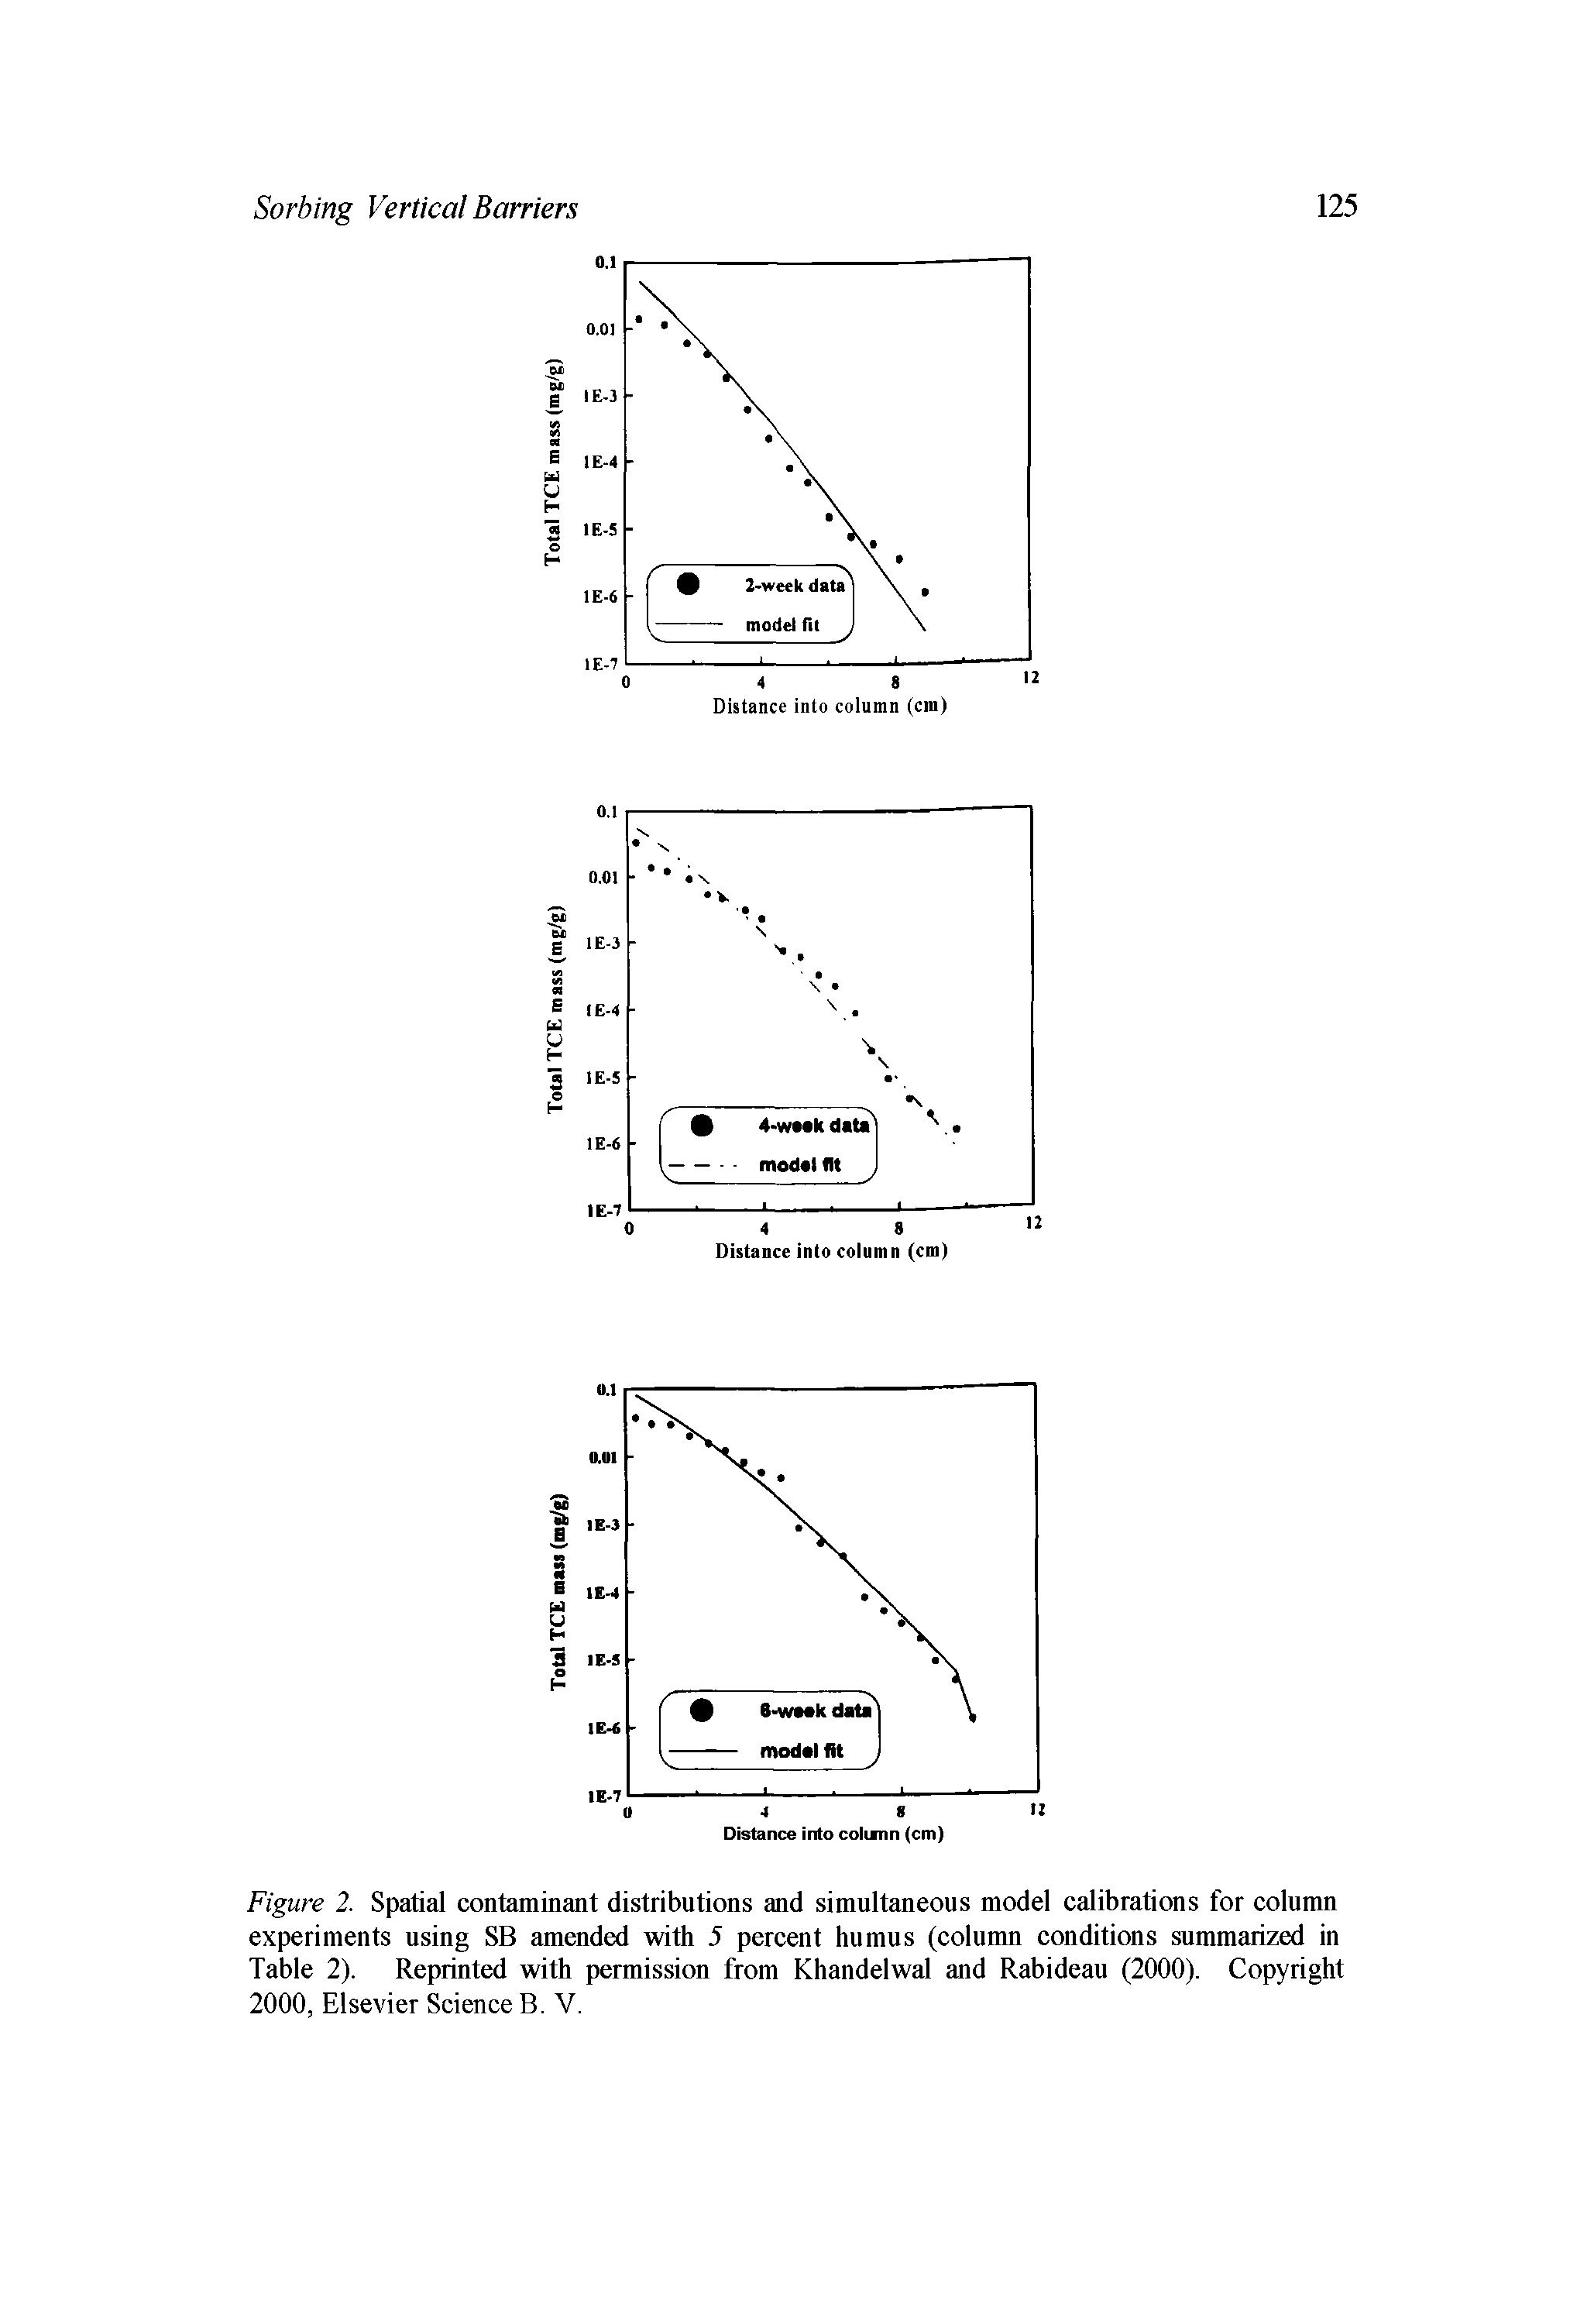 Figure 2. Spatial contaminant distributions and simultaneous model calibrations for column experiments using SB amended with 5 percent humus (column conditions summarized in Table 2). Reprinted with permission from Khandelwal and Rabideau (2000). Copyright 2000, Elsevier Science B. V.